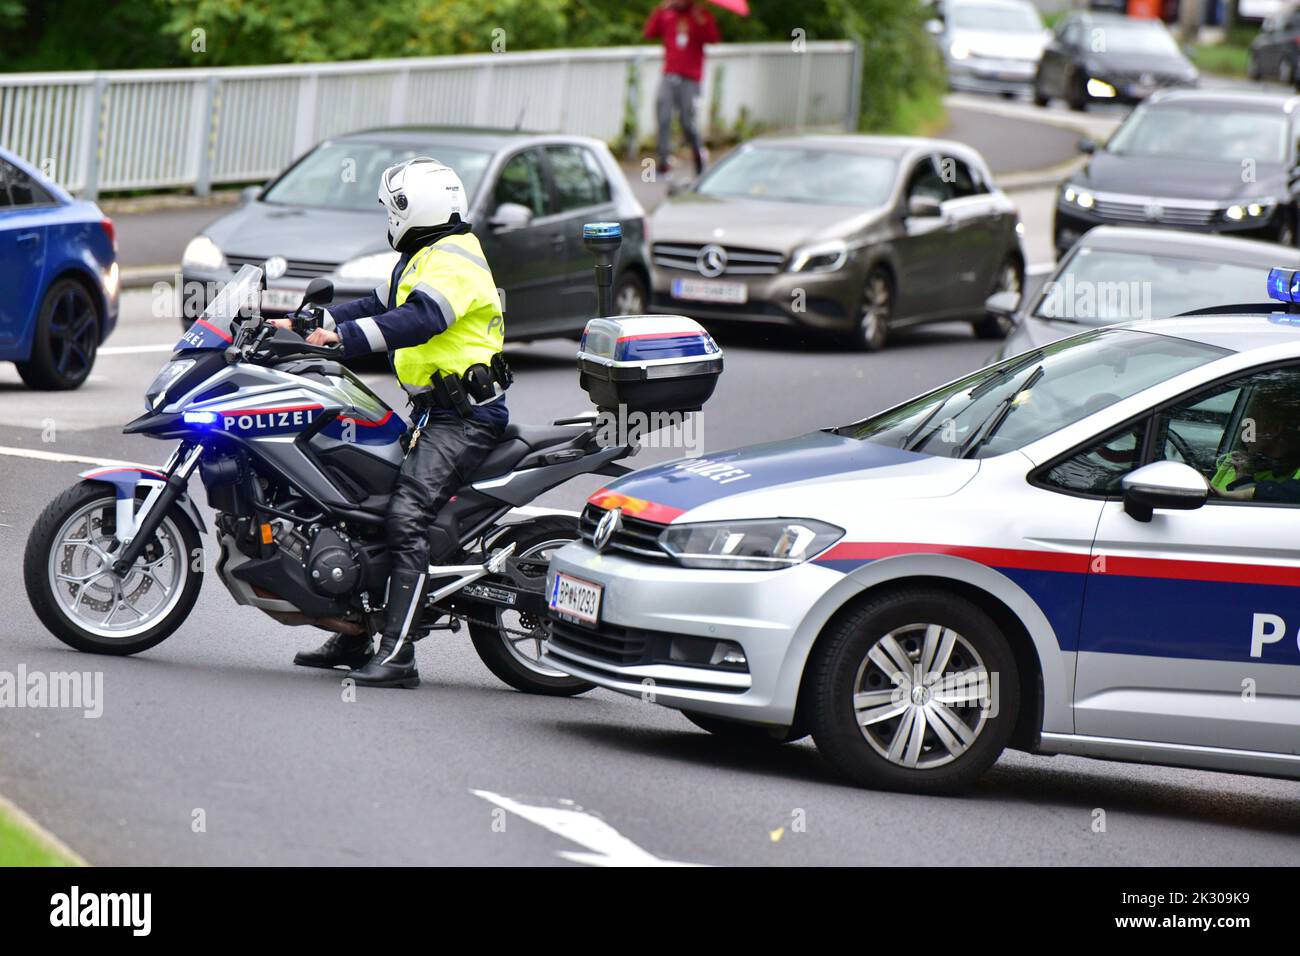 Police motorcycle on duty in Linz, Austria Stock Photo